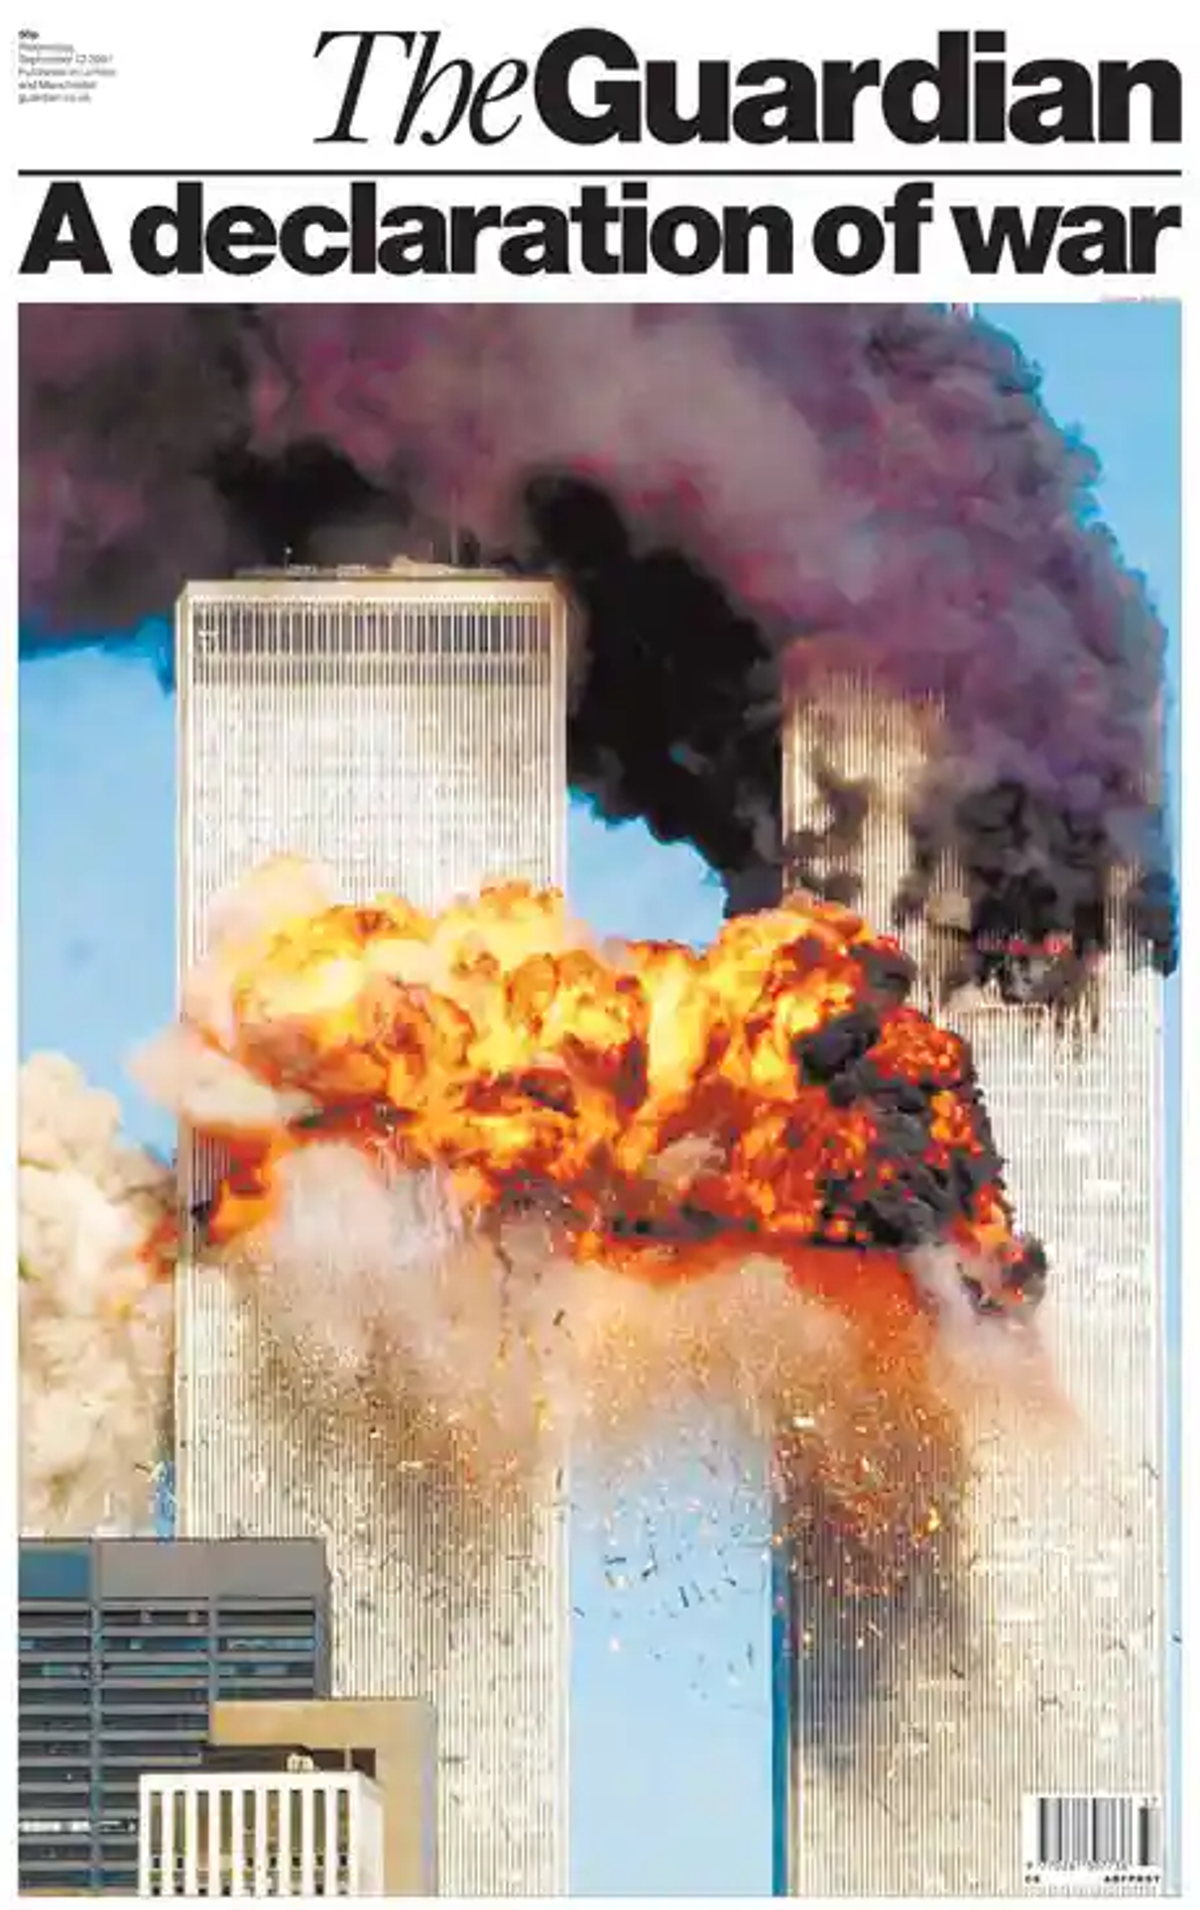 The Guardian’s front page on 12 September, 2001 (The Guardian)